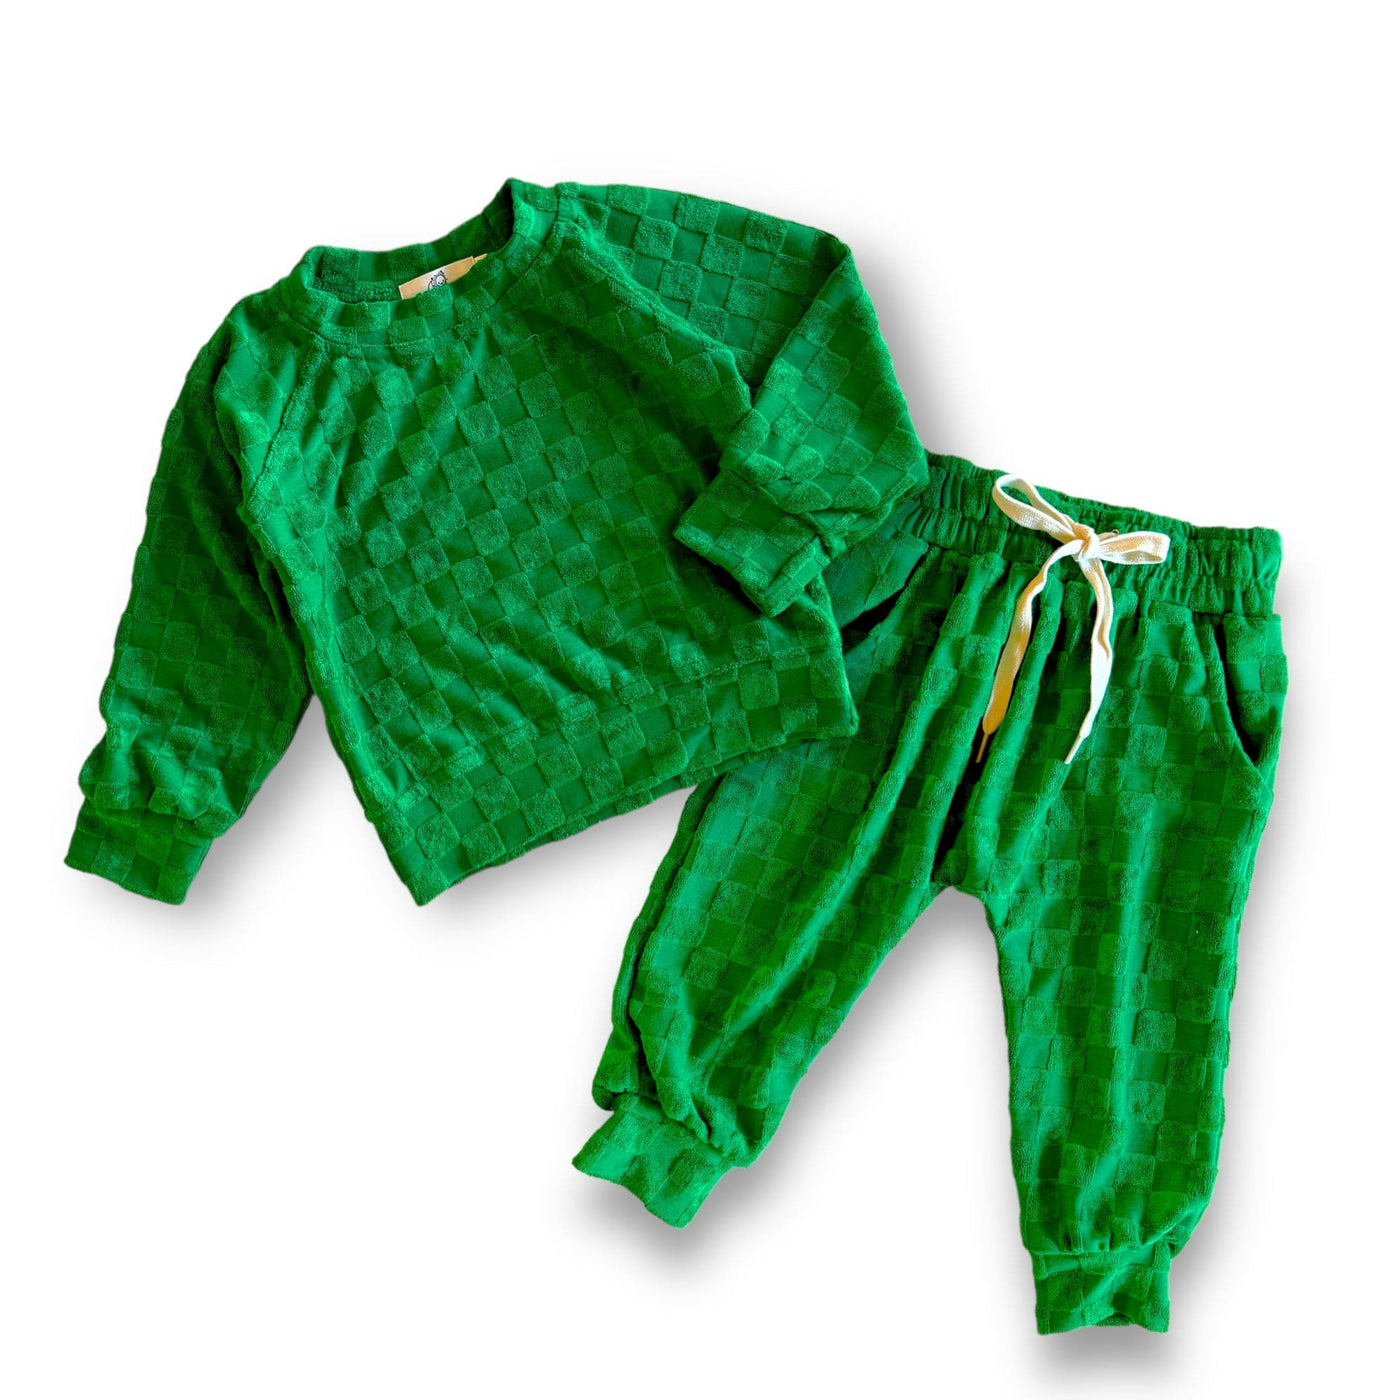 Best Day Ever Kids Baby & Toddler Outfits Checked Out Terry Leisure Set - Emerald City buy online boutique kids clothing